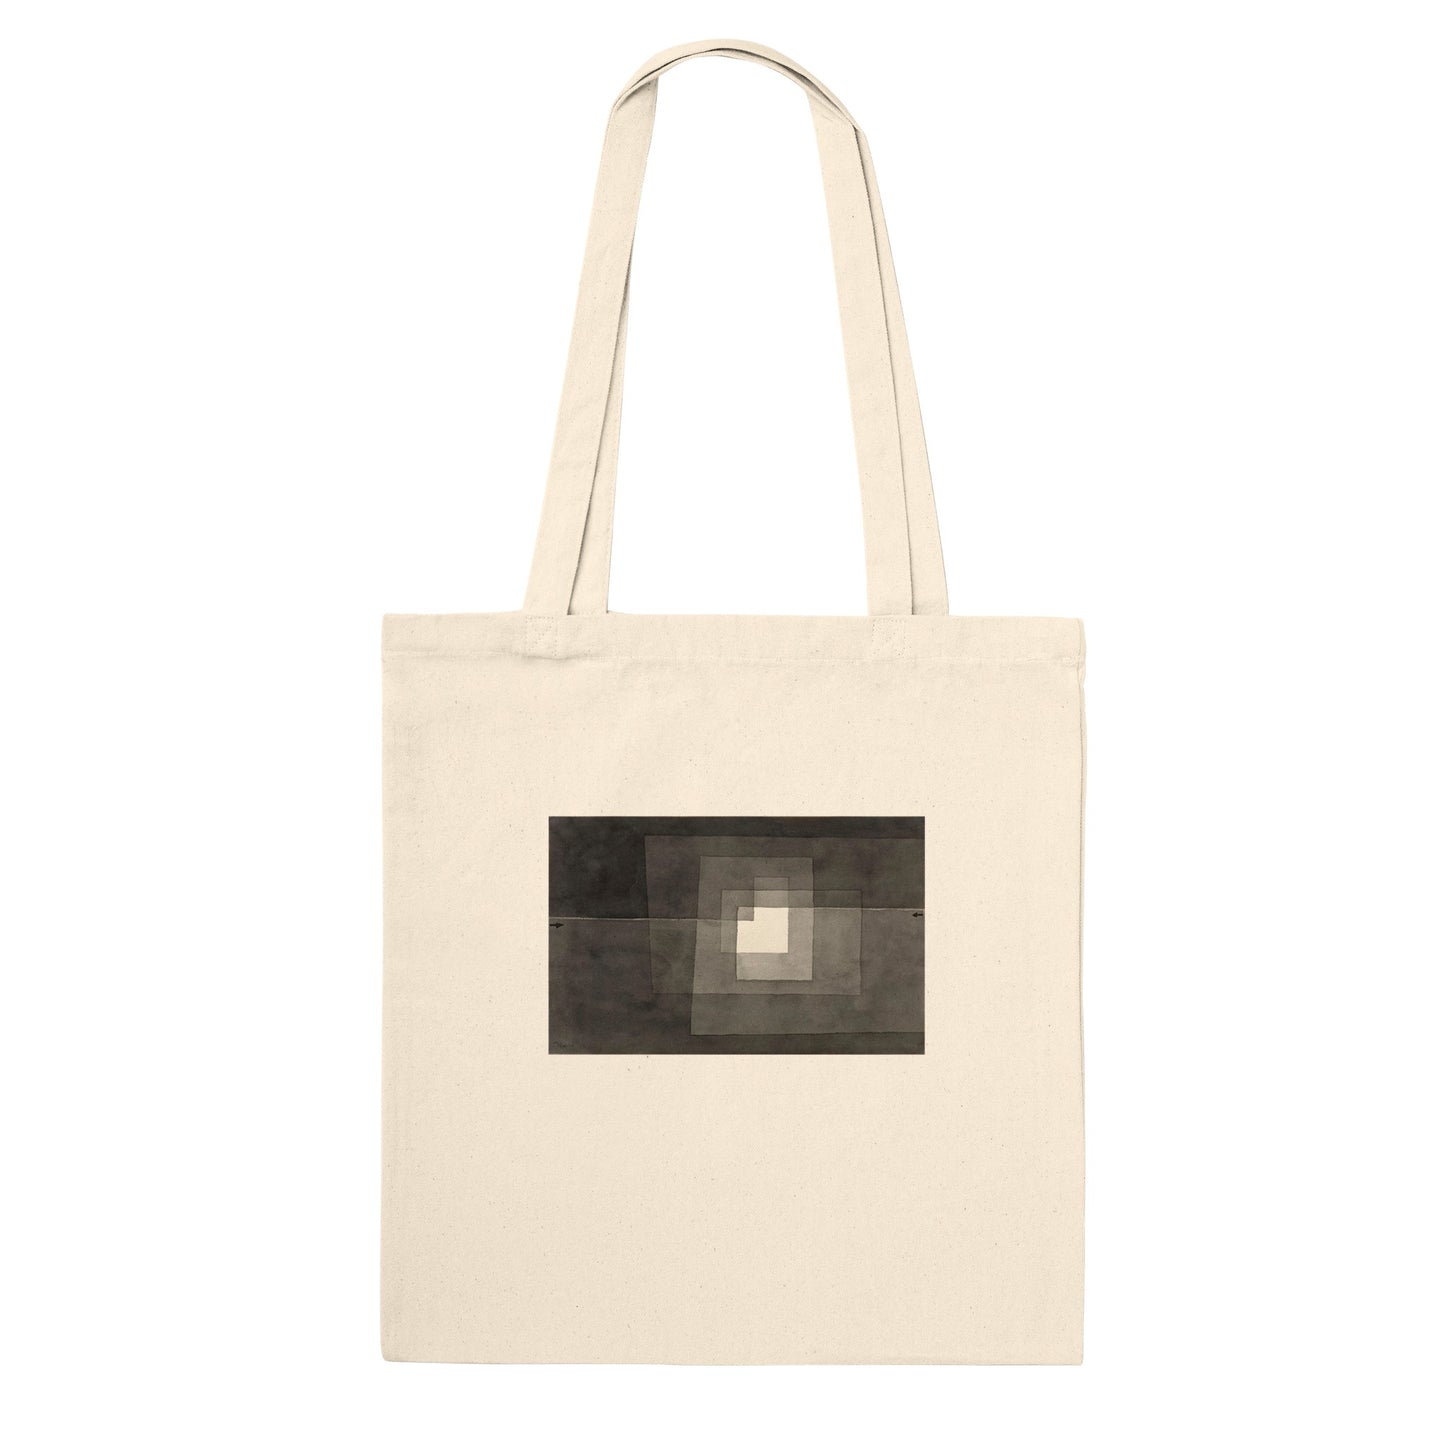 PAUL KLEE - TWO WAYS (1932) - CLASSIC TOTE BAG